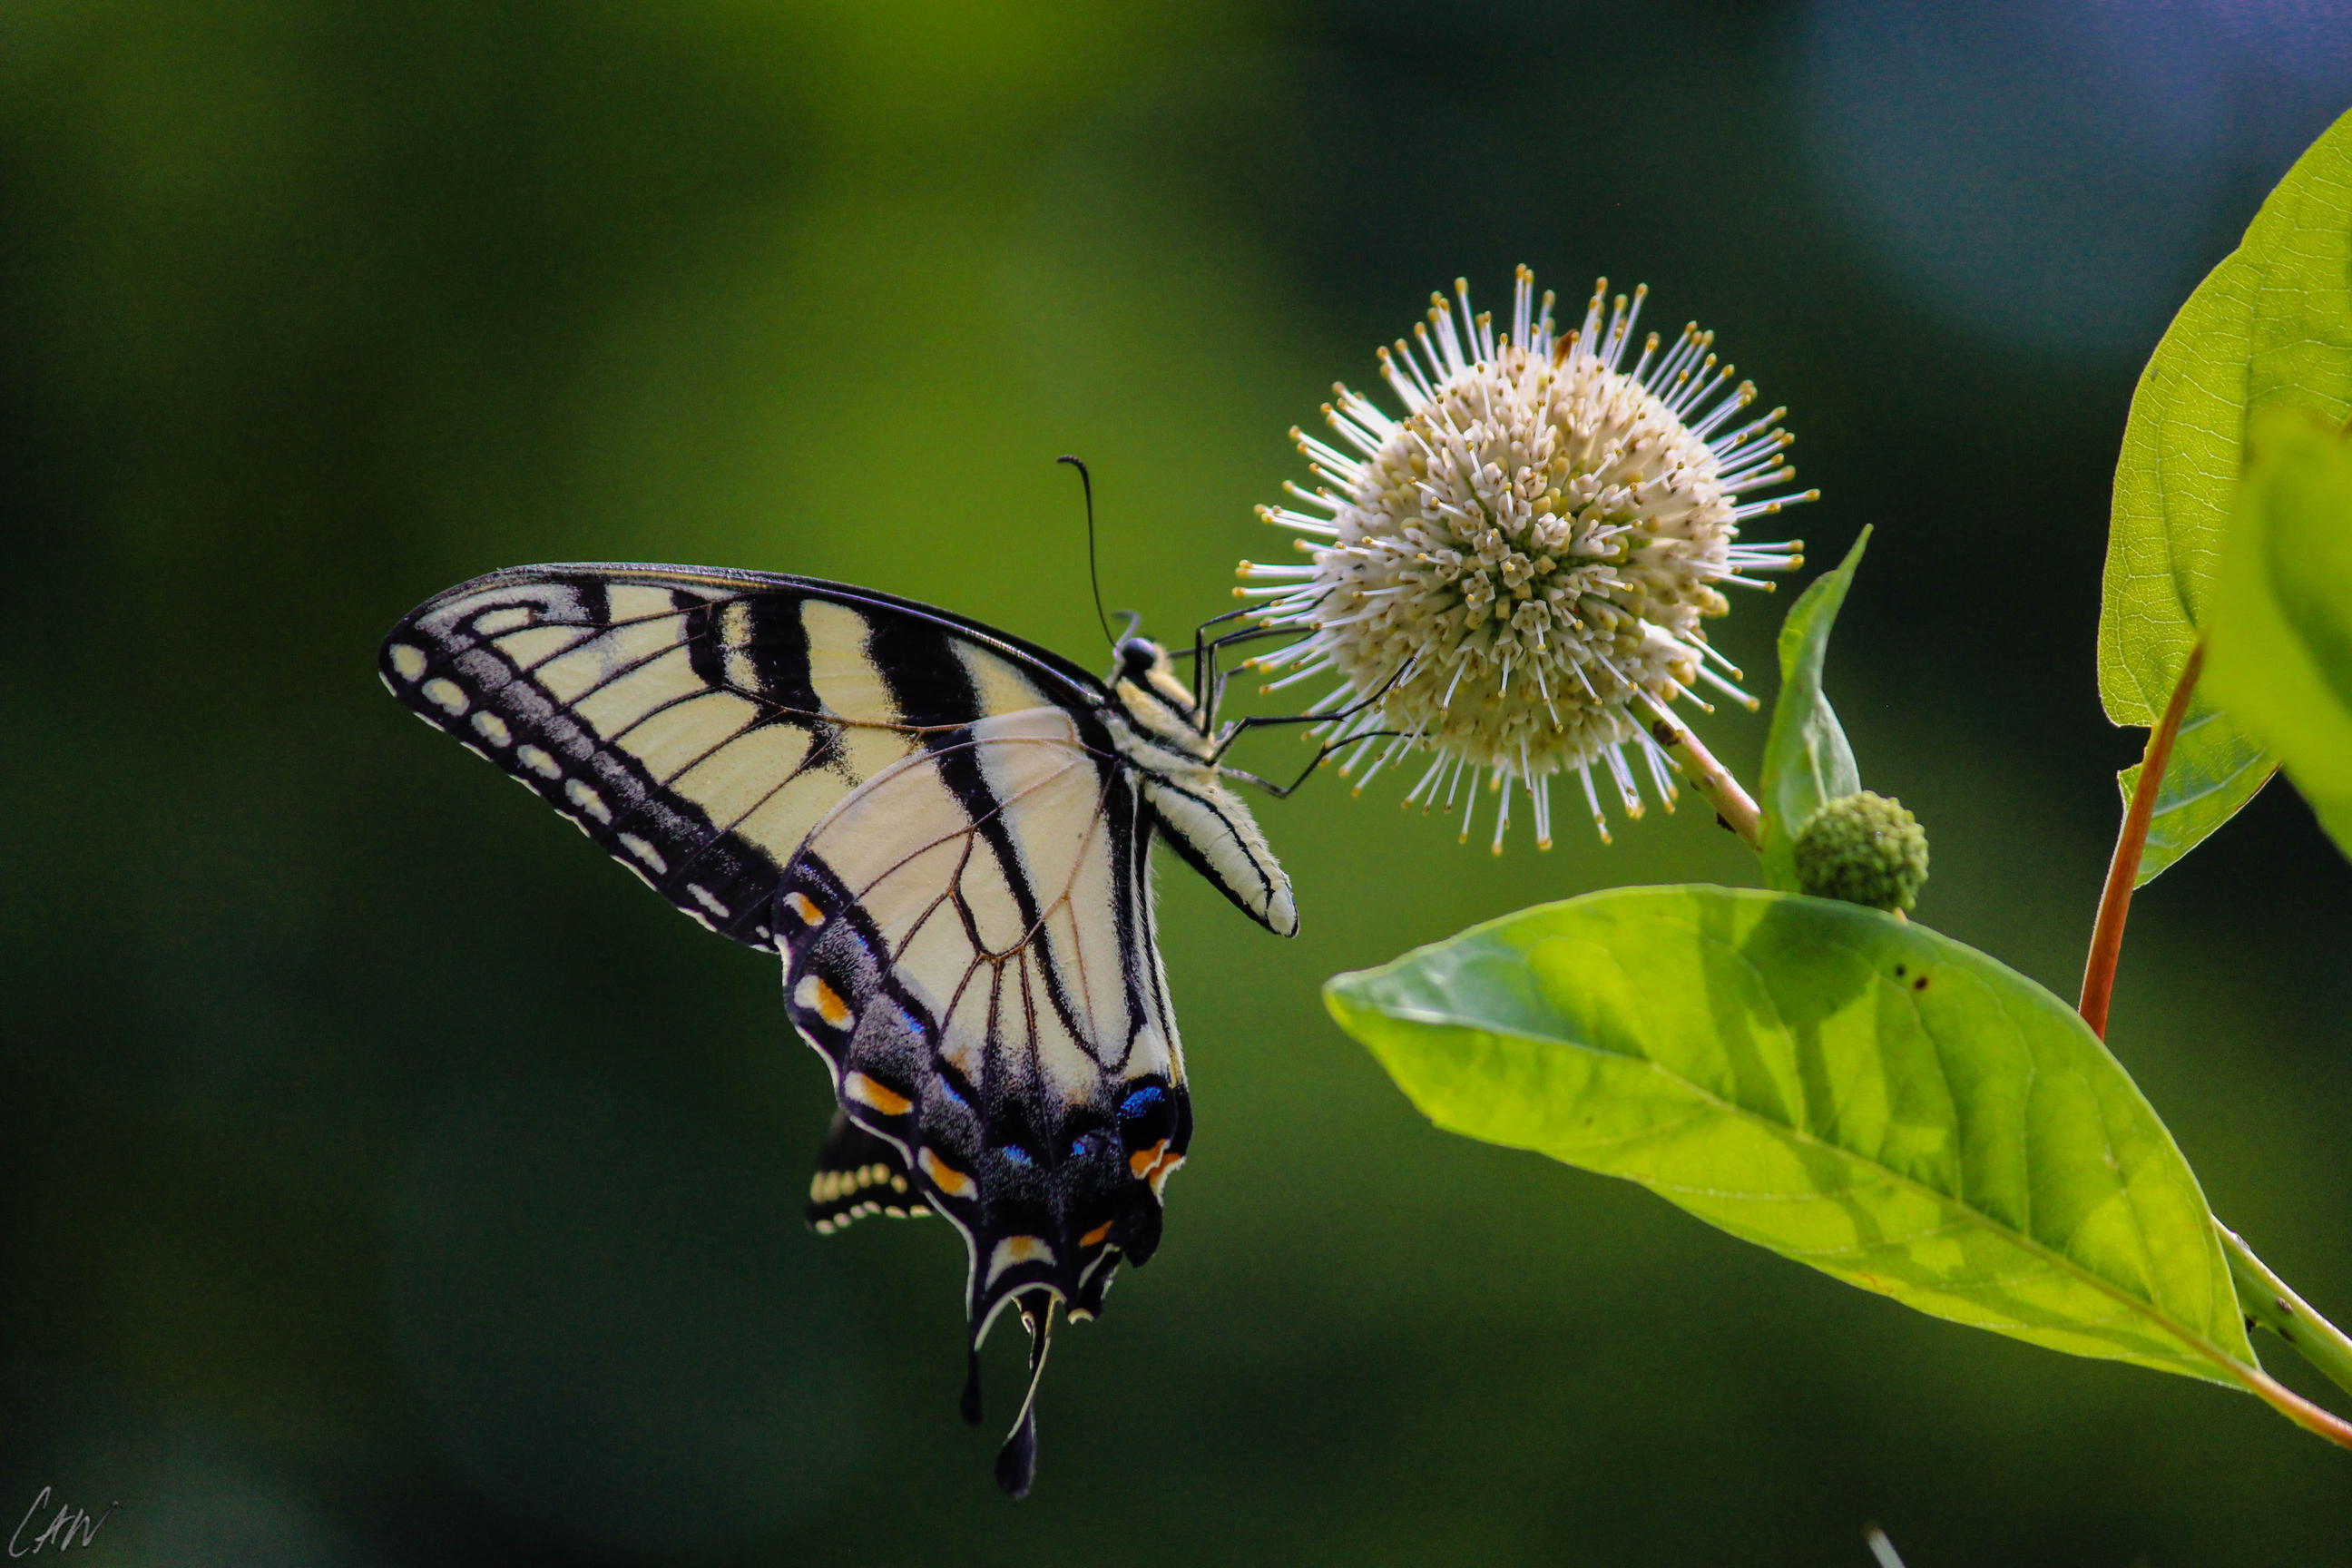 Eastern tiger swallowtail butterfly on buttonbush bloom